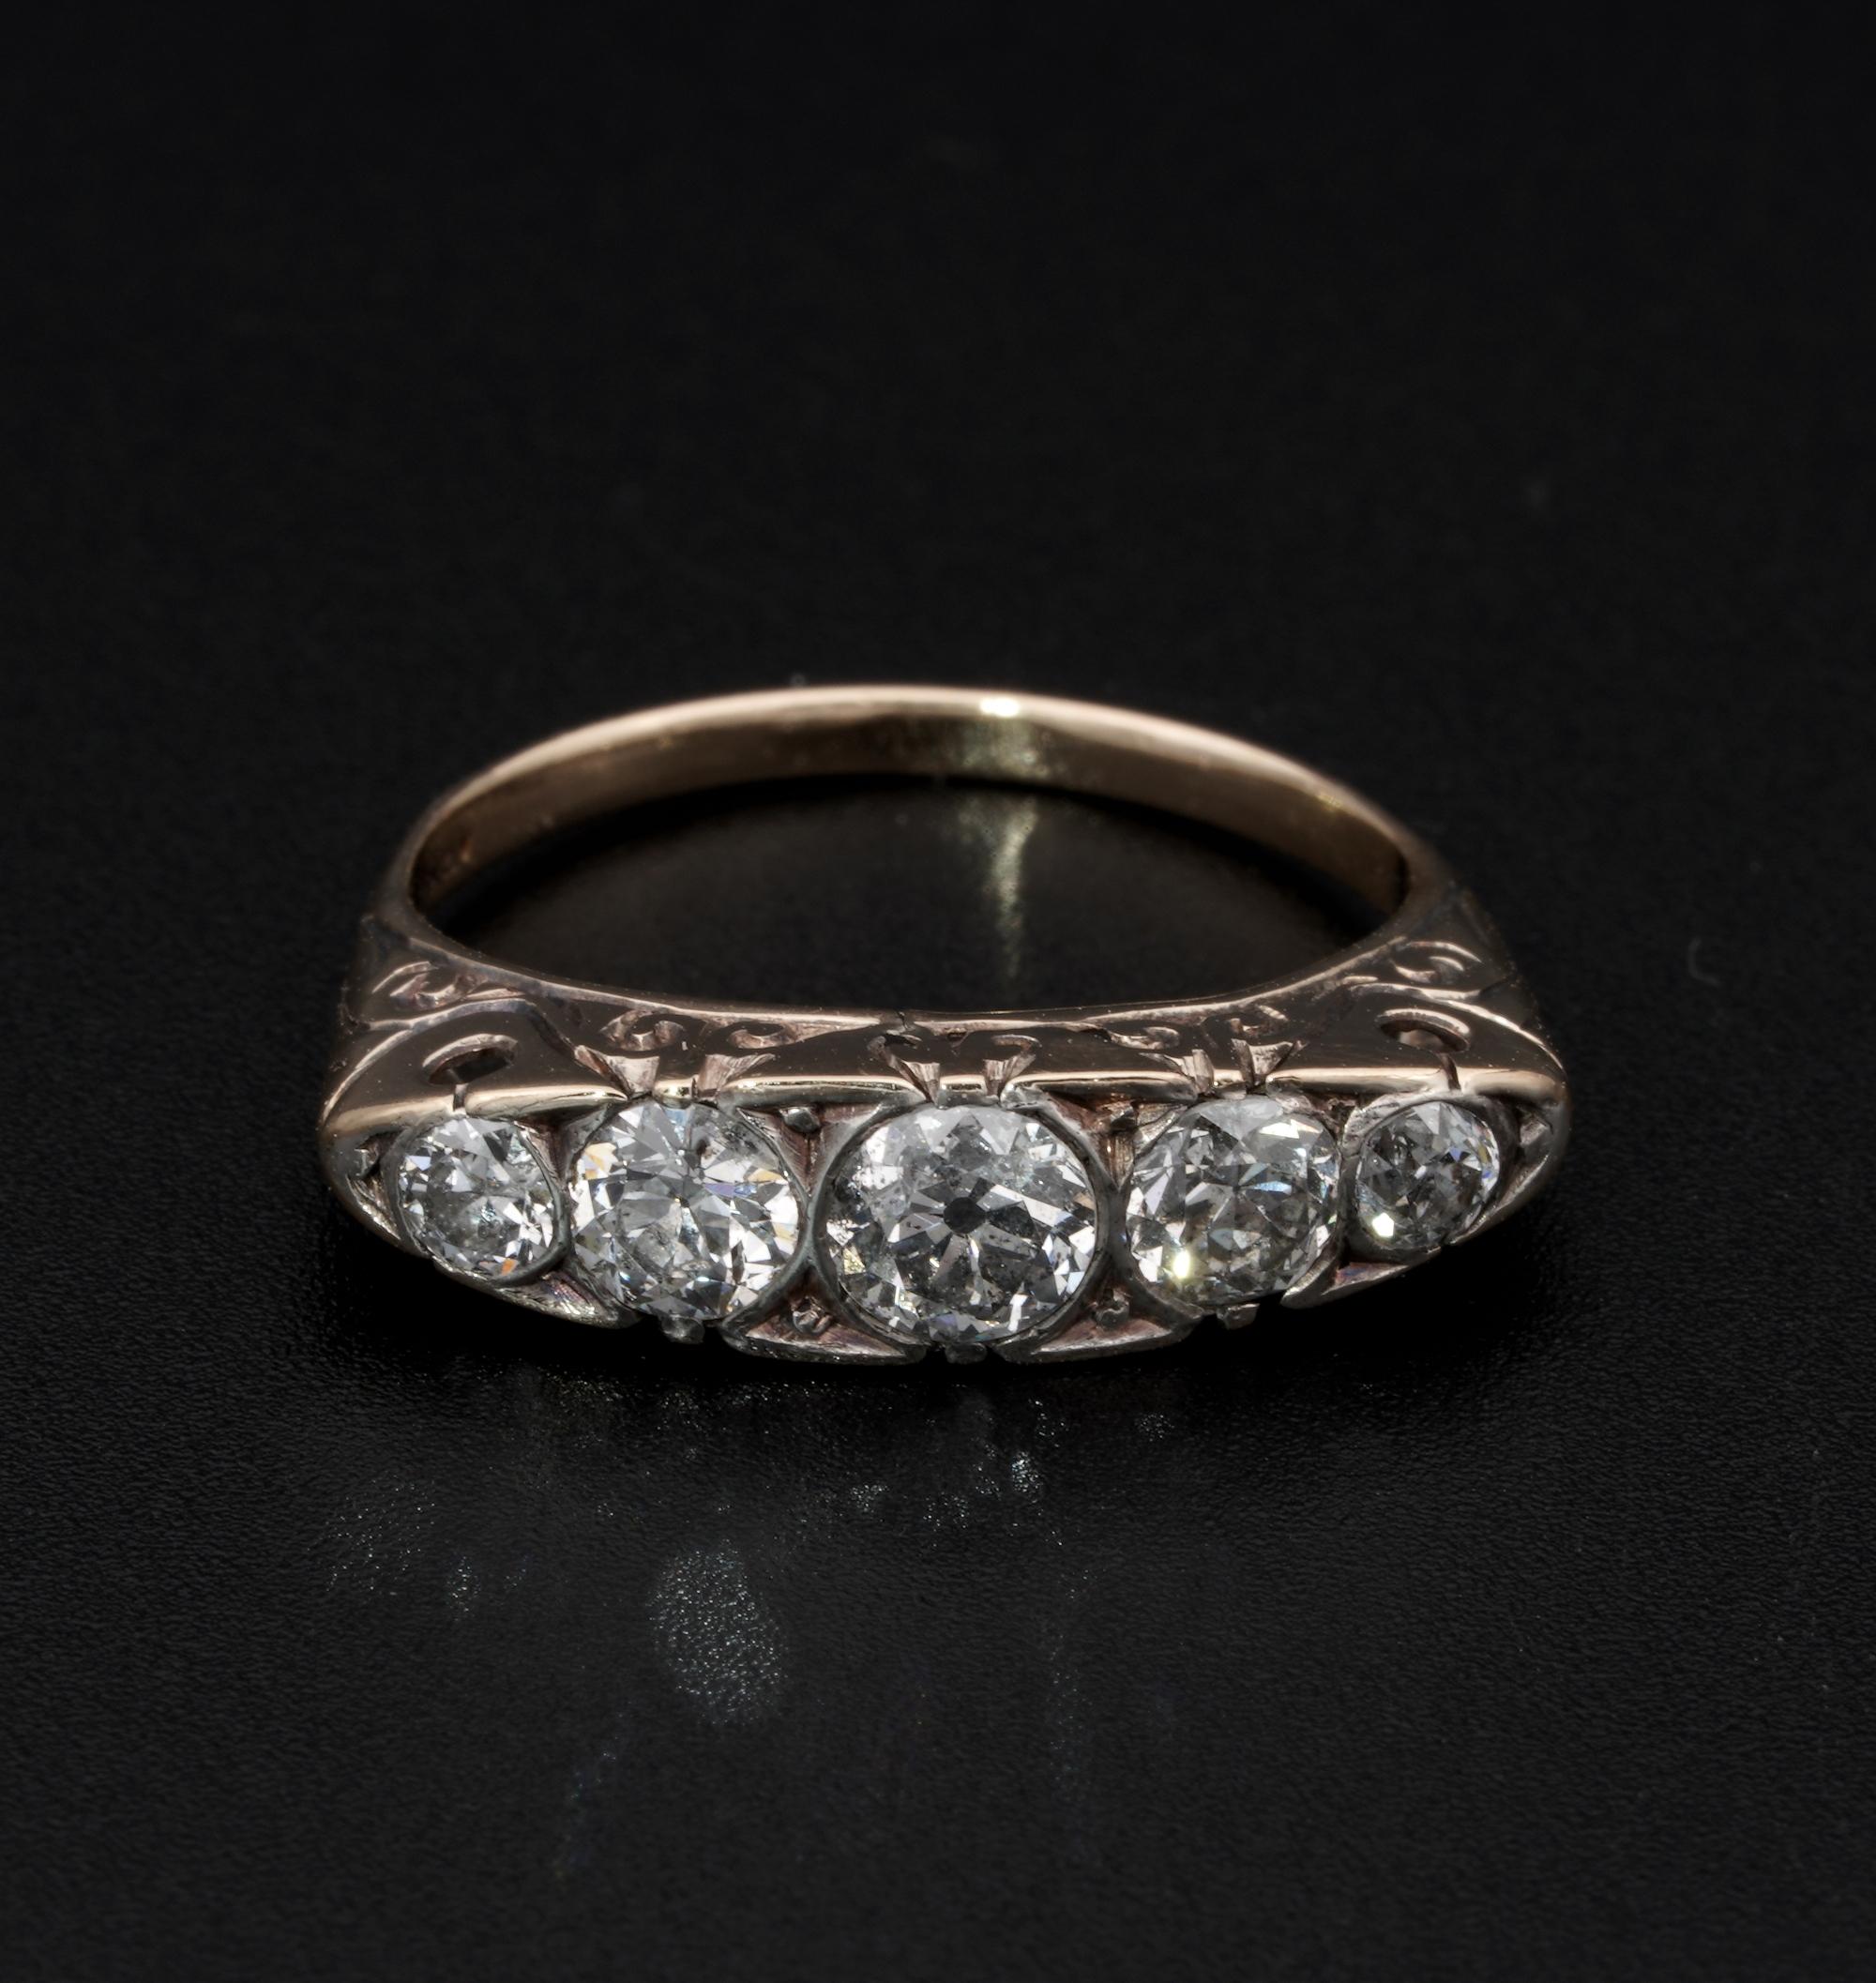 This Gorgeous five stone ring is 1900 ca.
Enchanting mount skilfully carved and pierced with scroll work entirely made of solid 18 KT gold - marked
Facing up with a graduated array of Old European cut Diamonds , bigger is .50 going down on sides for